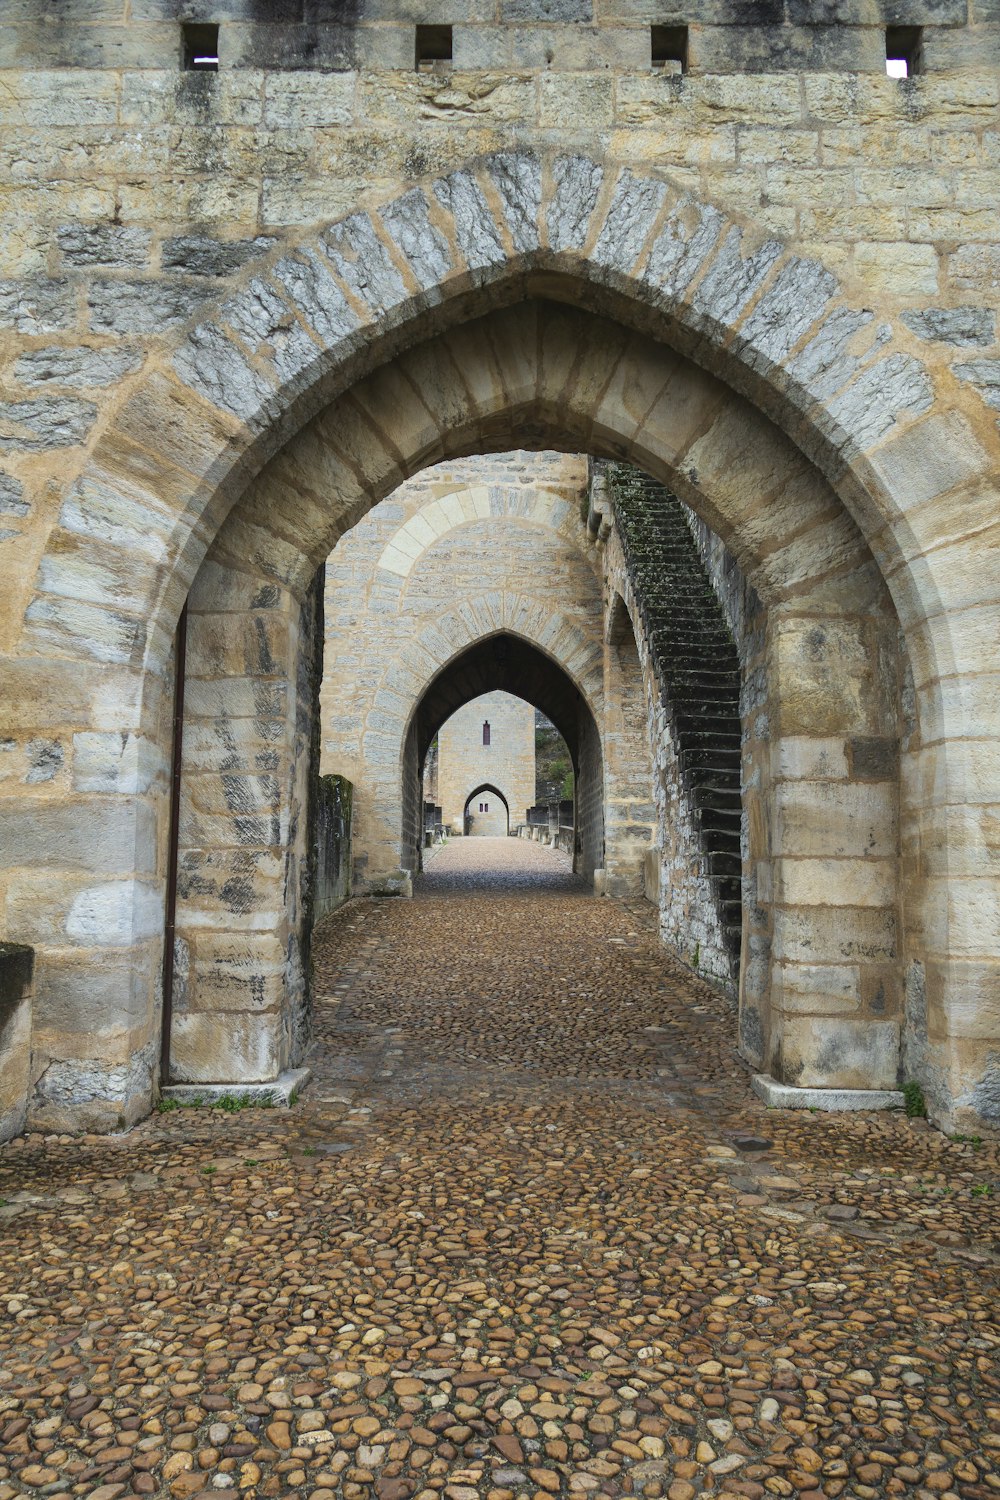 a stone archway with a clock on the side of it